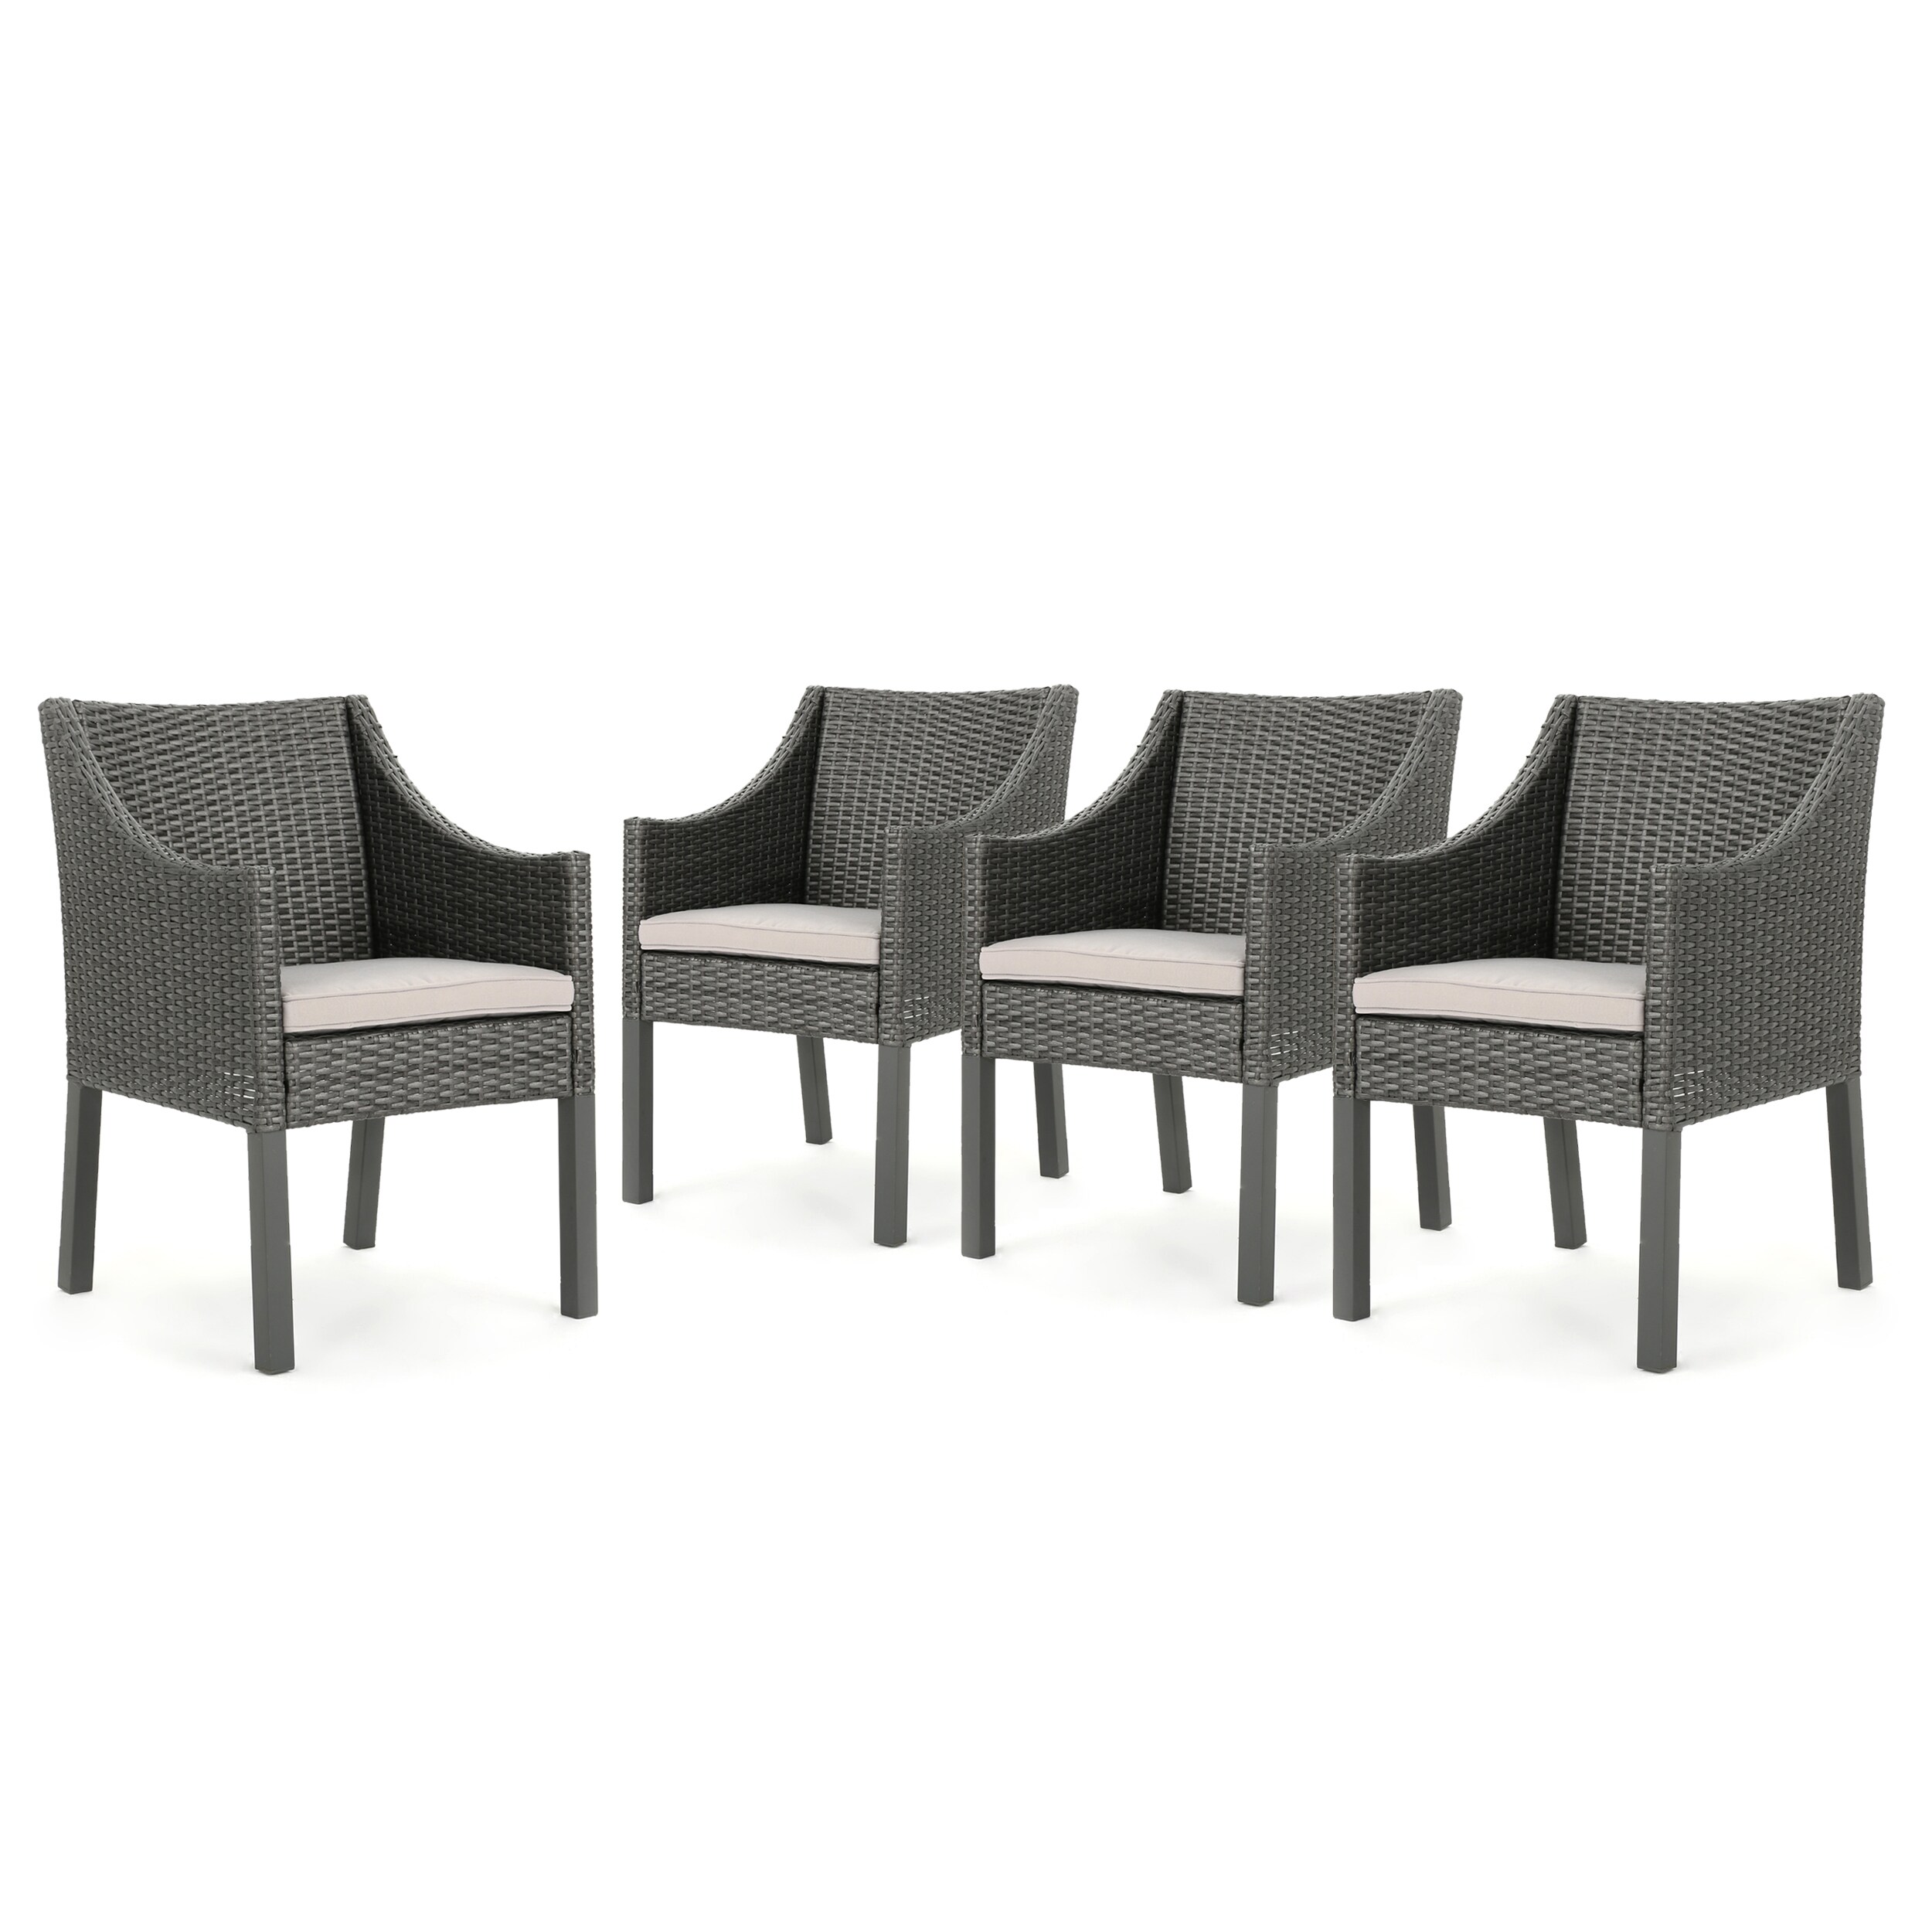 Antibes Outdoor Wicker Dining Chair With Cushions (set Of 4) By Christopher Knight Home